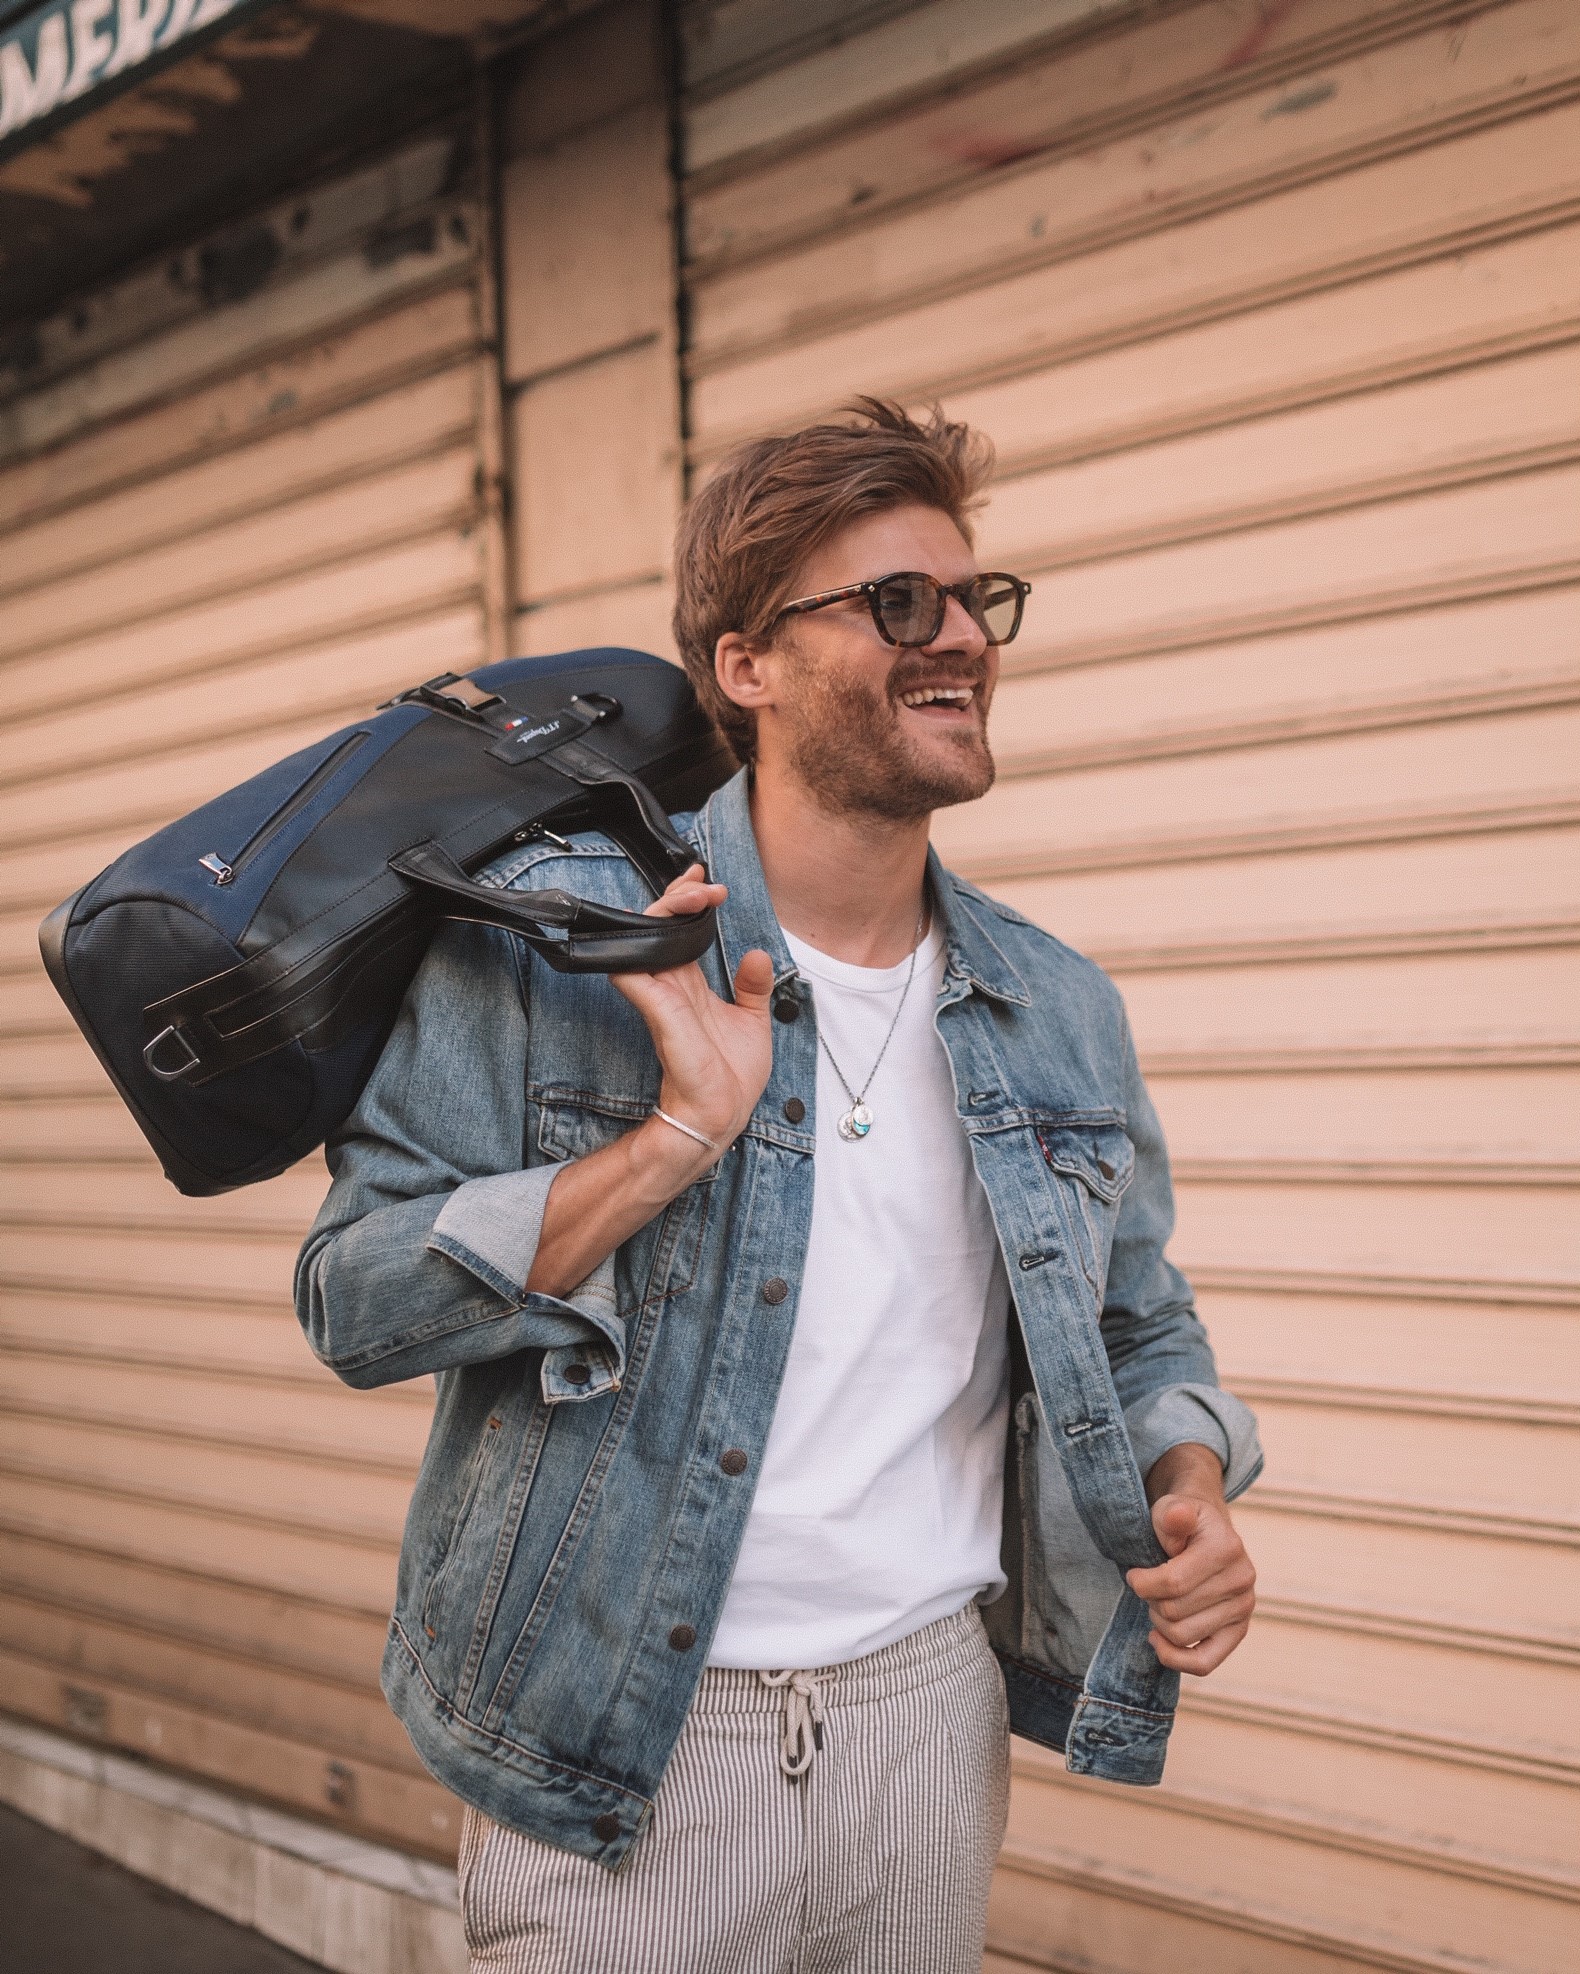 As Valhery to meet the demands of modern lifestyle chose « Défi Millennium ». With its unscratchable nylon, this bag is designed for the urban citizen :